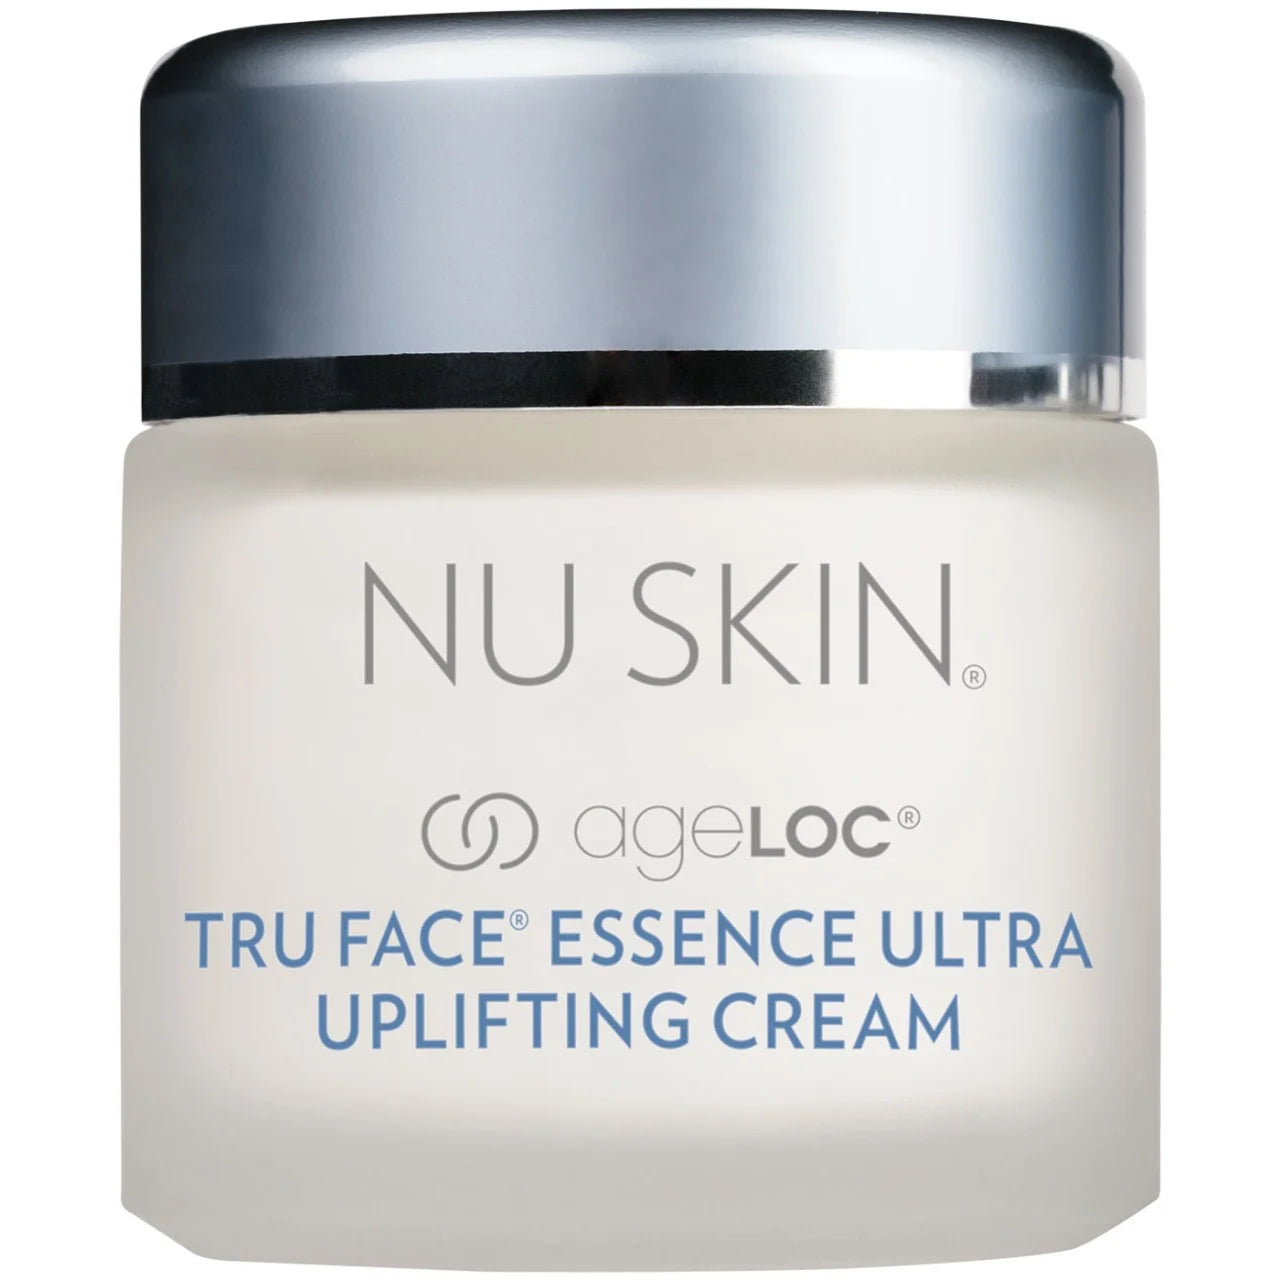 ageLOC® Tru Face® Essence Ultra Uplifting CreamBuy
* Discount will apply at checkout. 

MEET AGELOC TRU FACE ESSENCE ULTRA UPLIFTING CREAMInstant results. Lasting benefits. ageLOC Tru Face Essence Ultra UpliftingageLOC® Tru Face® Essence Ultra Uplifting Cream